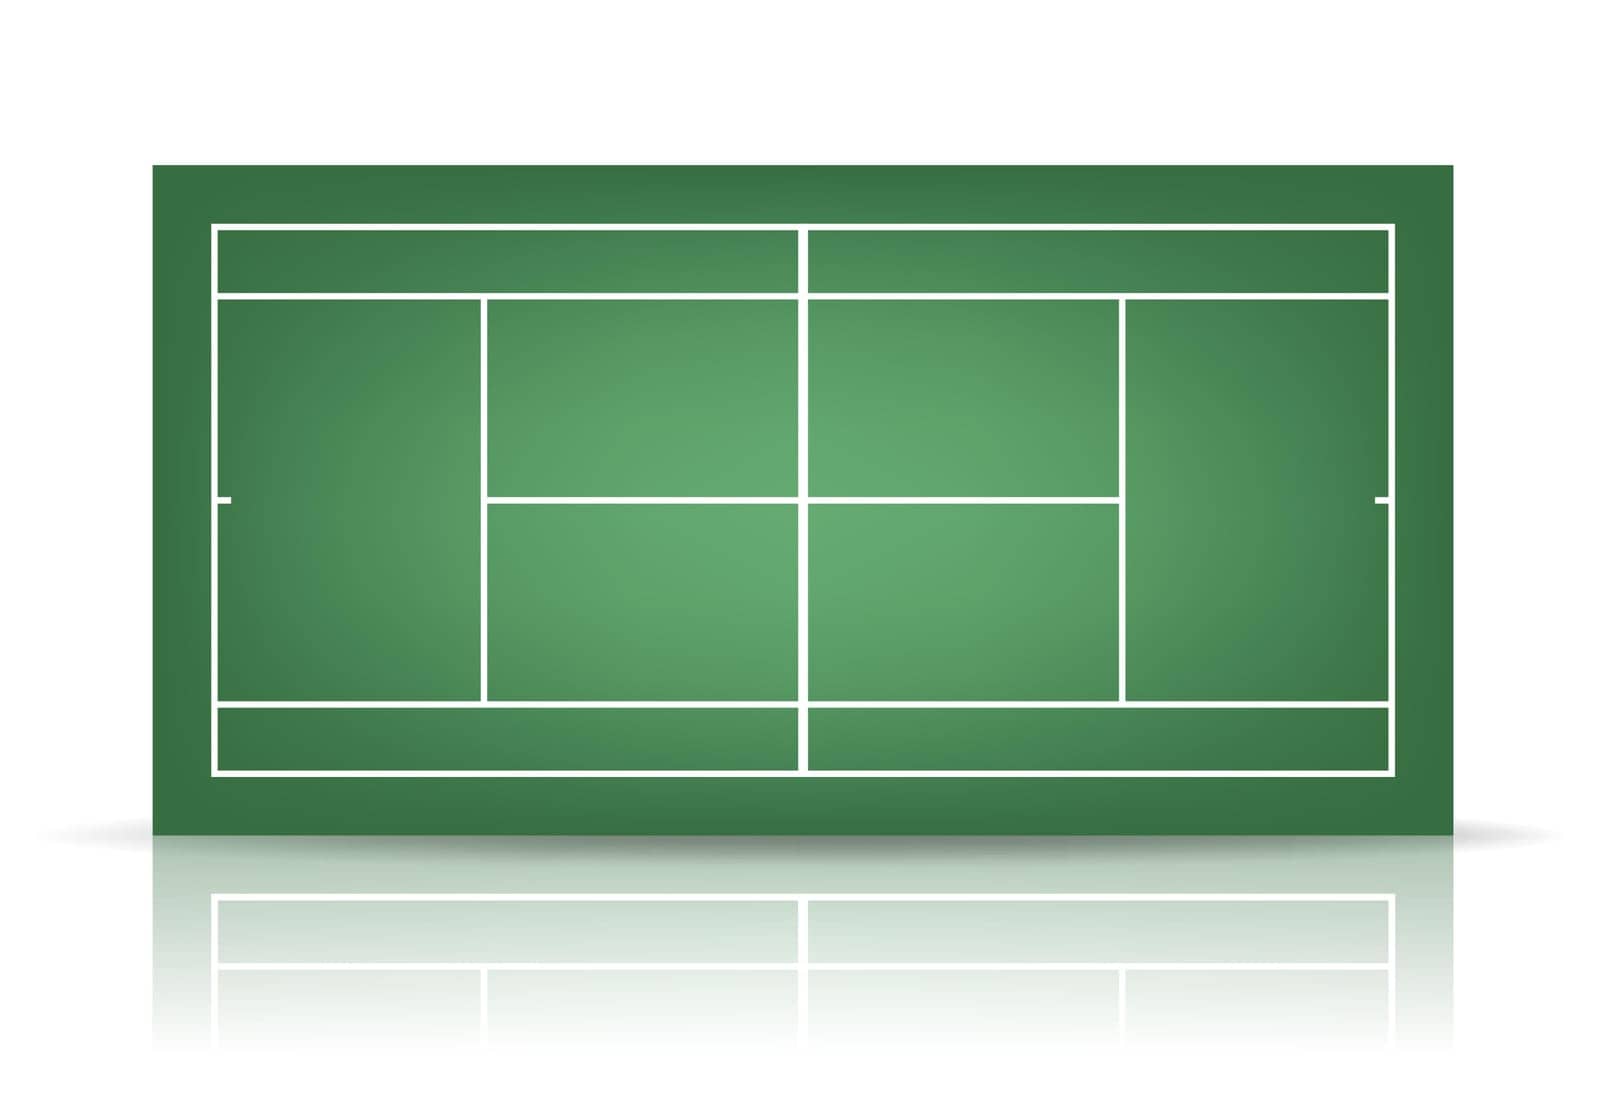 Green tennis court with reflection. Vector EPS10 illustration.